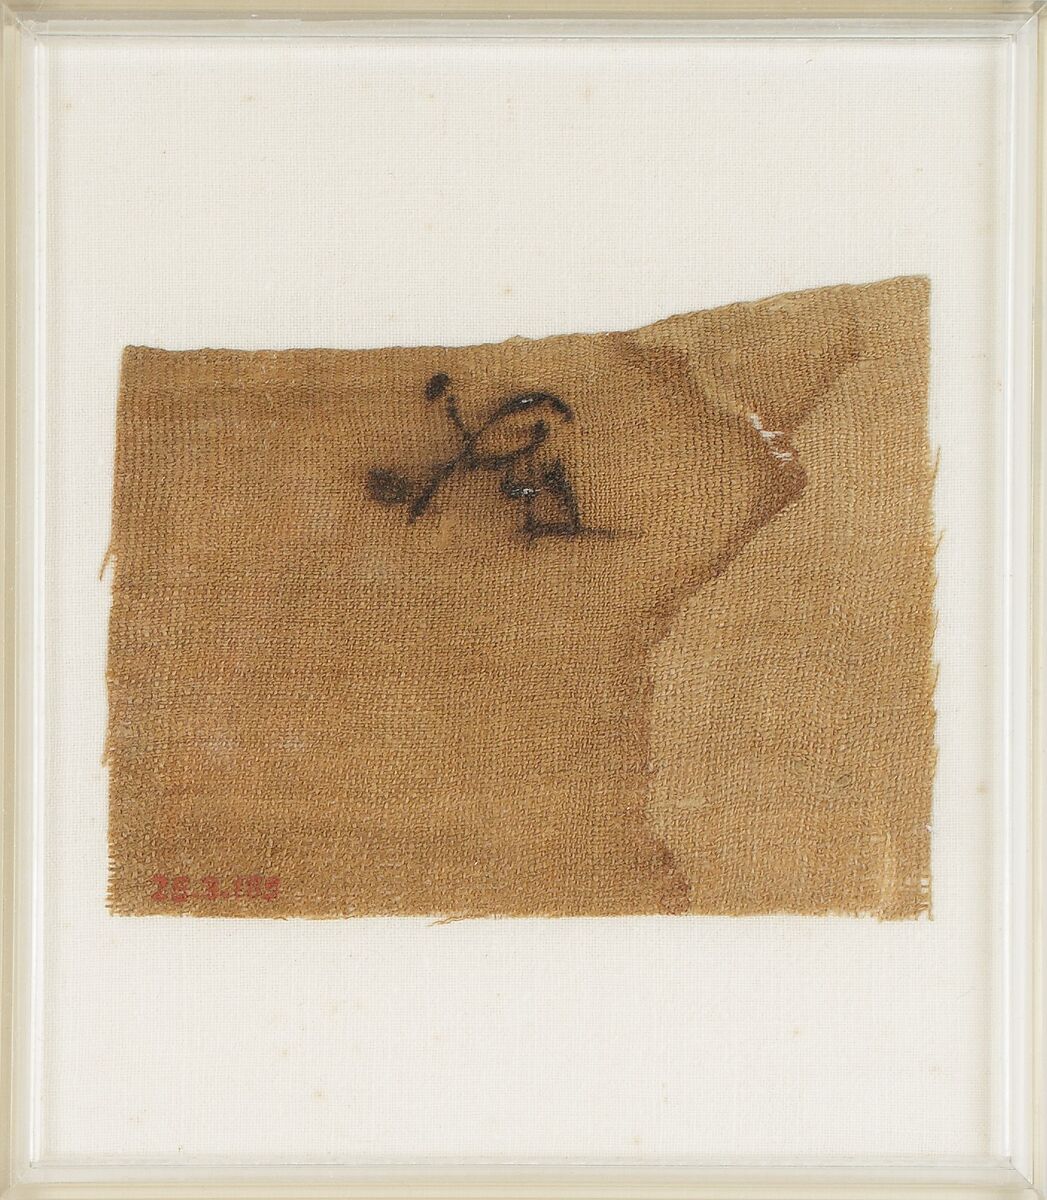 Mummy bandage inscribed with a falcon, Linen 